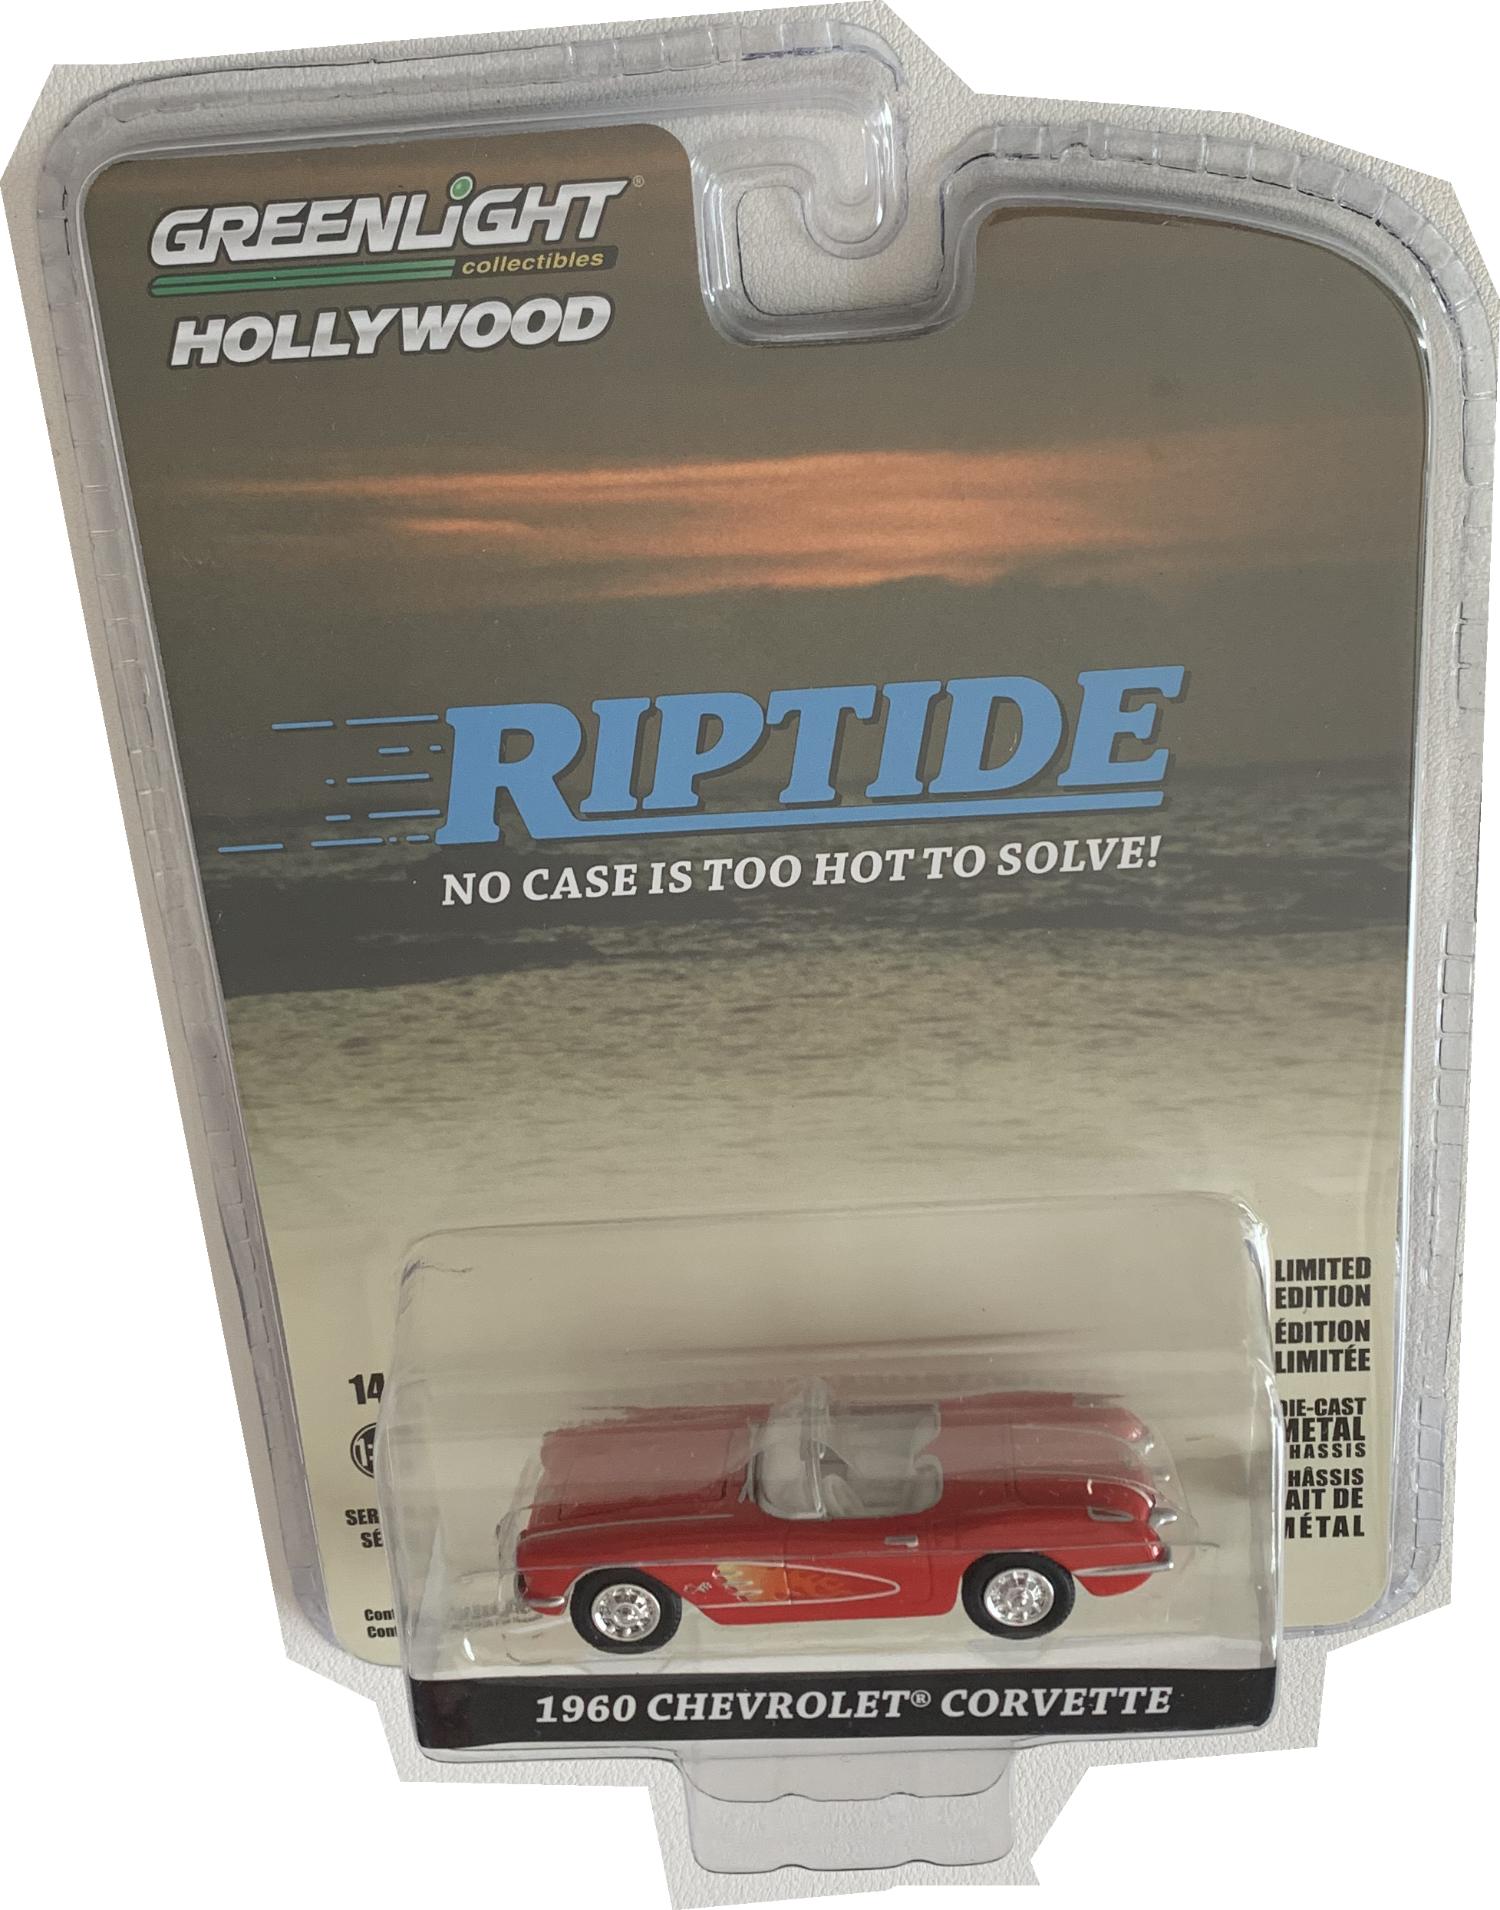 From the Australian drama 'Riptide '1960 Chevrolet Corvette in red 1:64 scale model from Greenlight, limited   edition